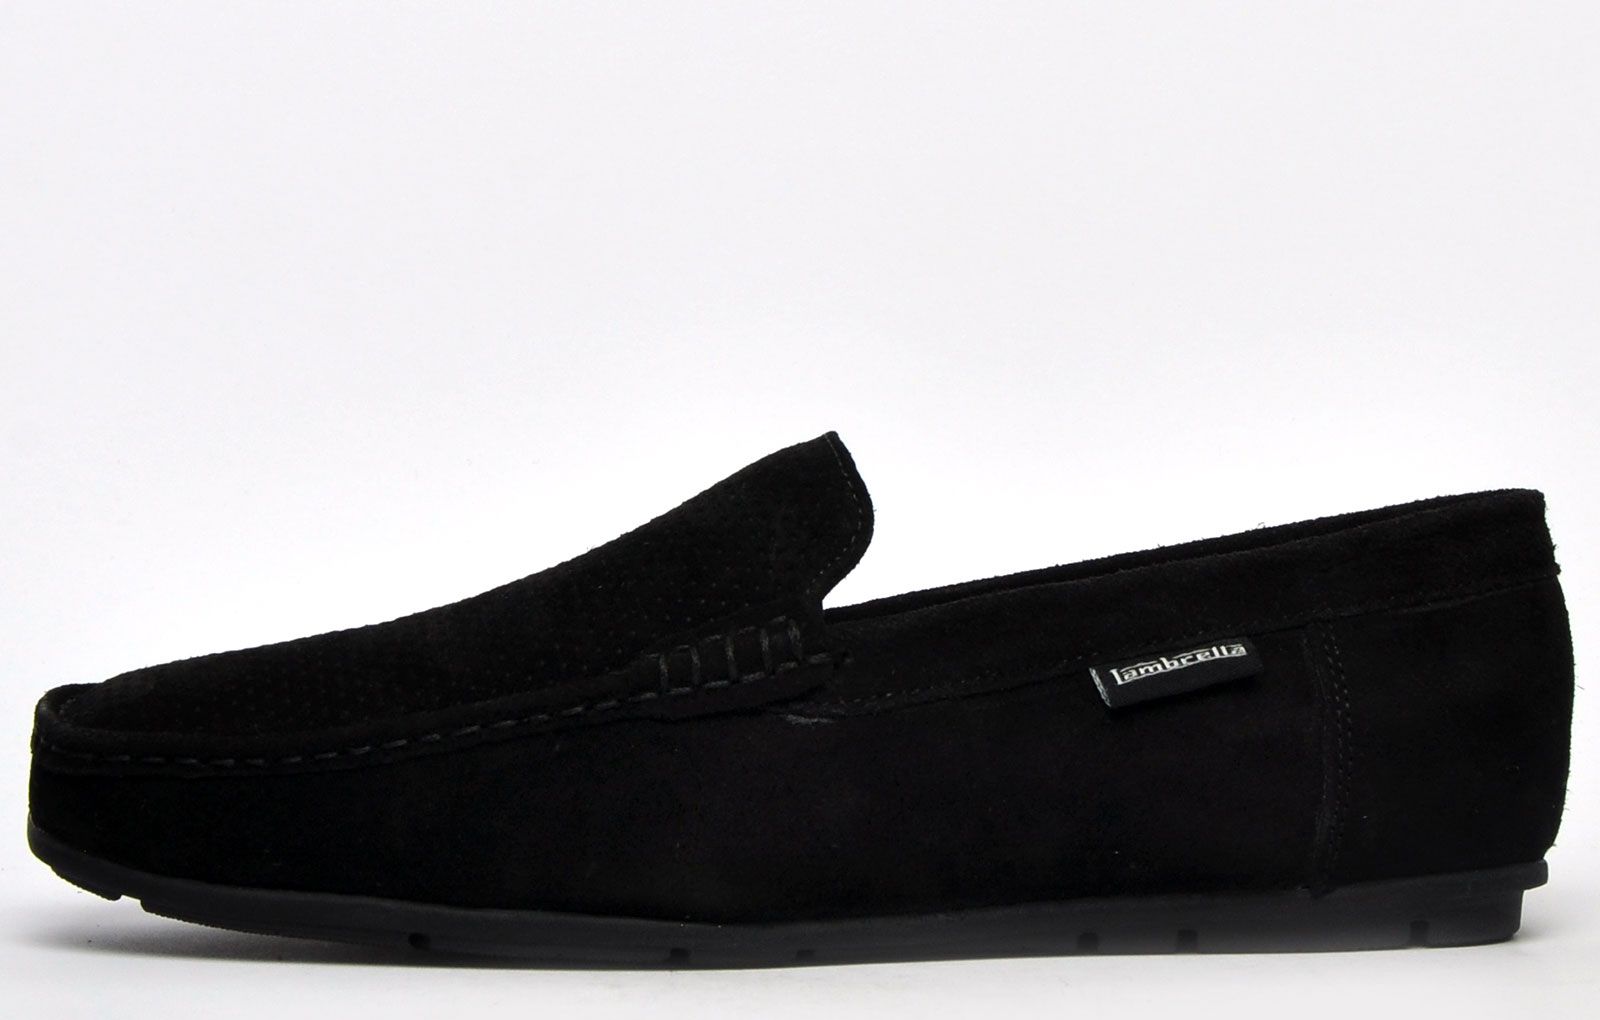 An essential for the fashion-conscious gent, these Scoot mens Lambretta suede leather loafers are a true wardrobe staple. Boasting effortless charm, these mens slip-ons are presented in a black suede leather upper ensuring a quality finish that will compliment any outfit. A hardwearing rubber outsole ensures grip and durability on a variety of surfaces, ensuring long lasting wear that wont let you down.
 Versatile in nature, the Scoot can be easily dressed up for those more formal occasions or teamed up with any smart casual attire for the ultimate sophisticated look.
 - Premium suede leather upper
 - Designer stitch detailing throughout 
 - Durable grippy outsole 
 - Easy slip on / off